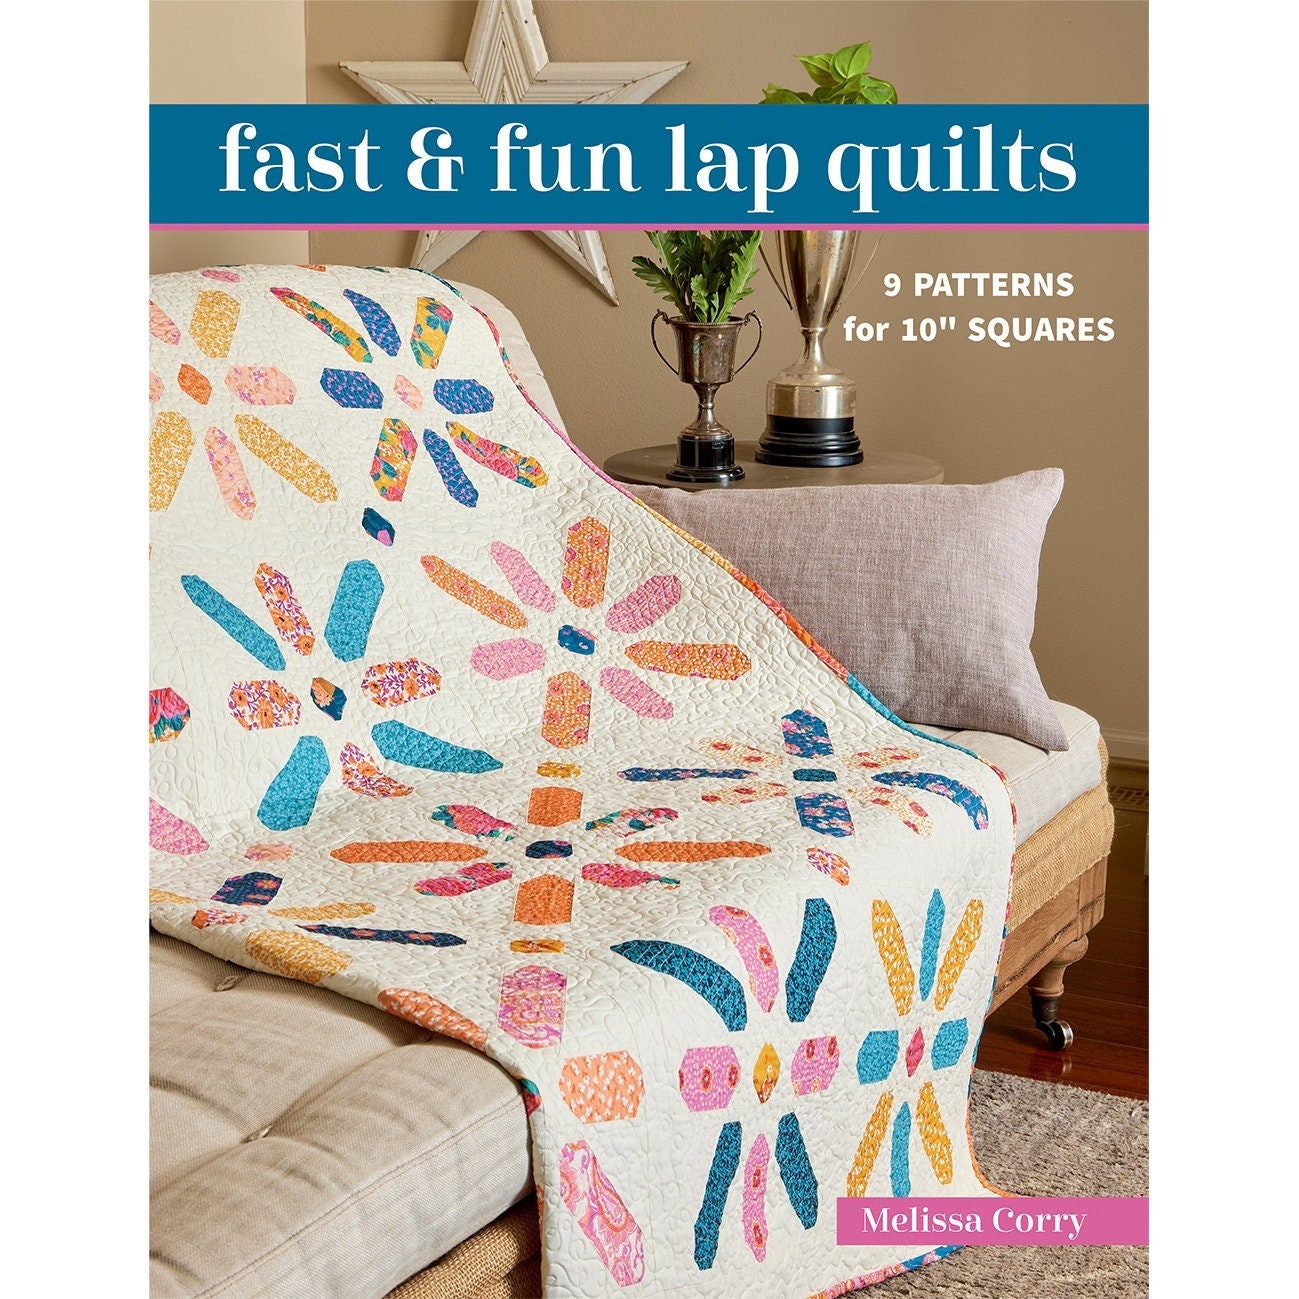 Happy Quilting: Dizzy Days Irish Chain - A New Happy Quilting